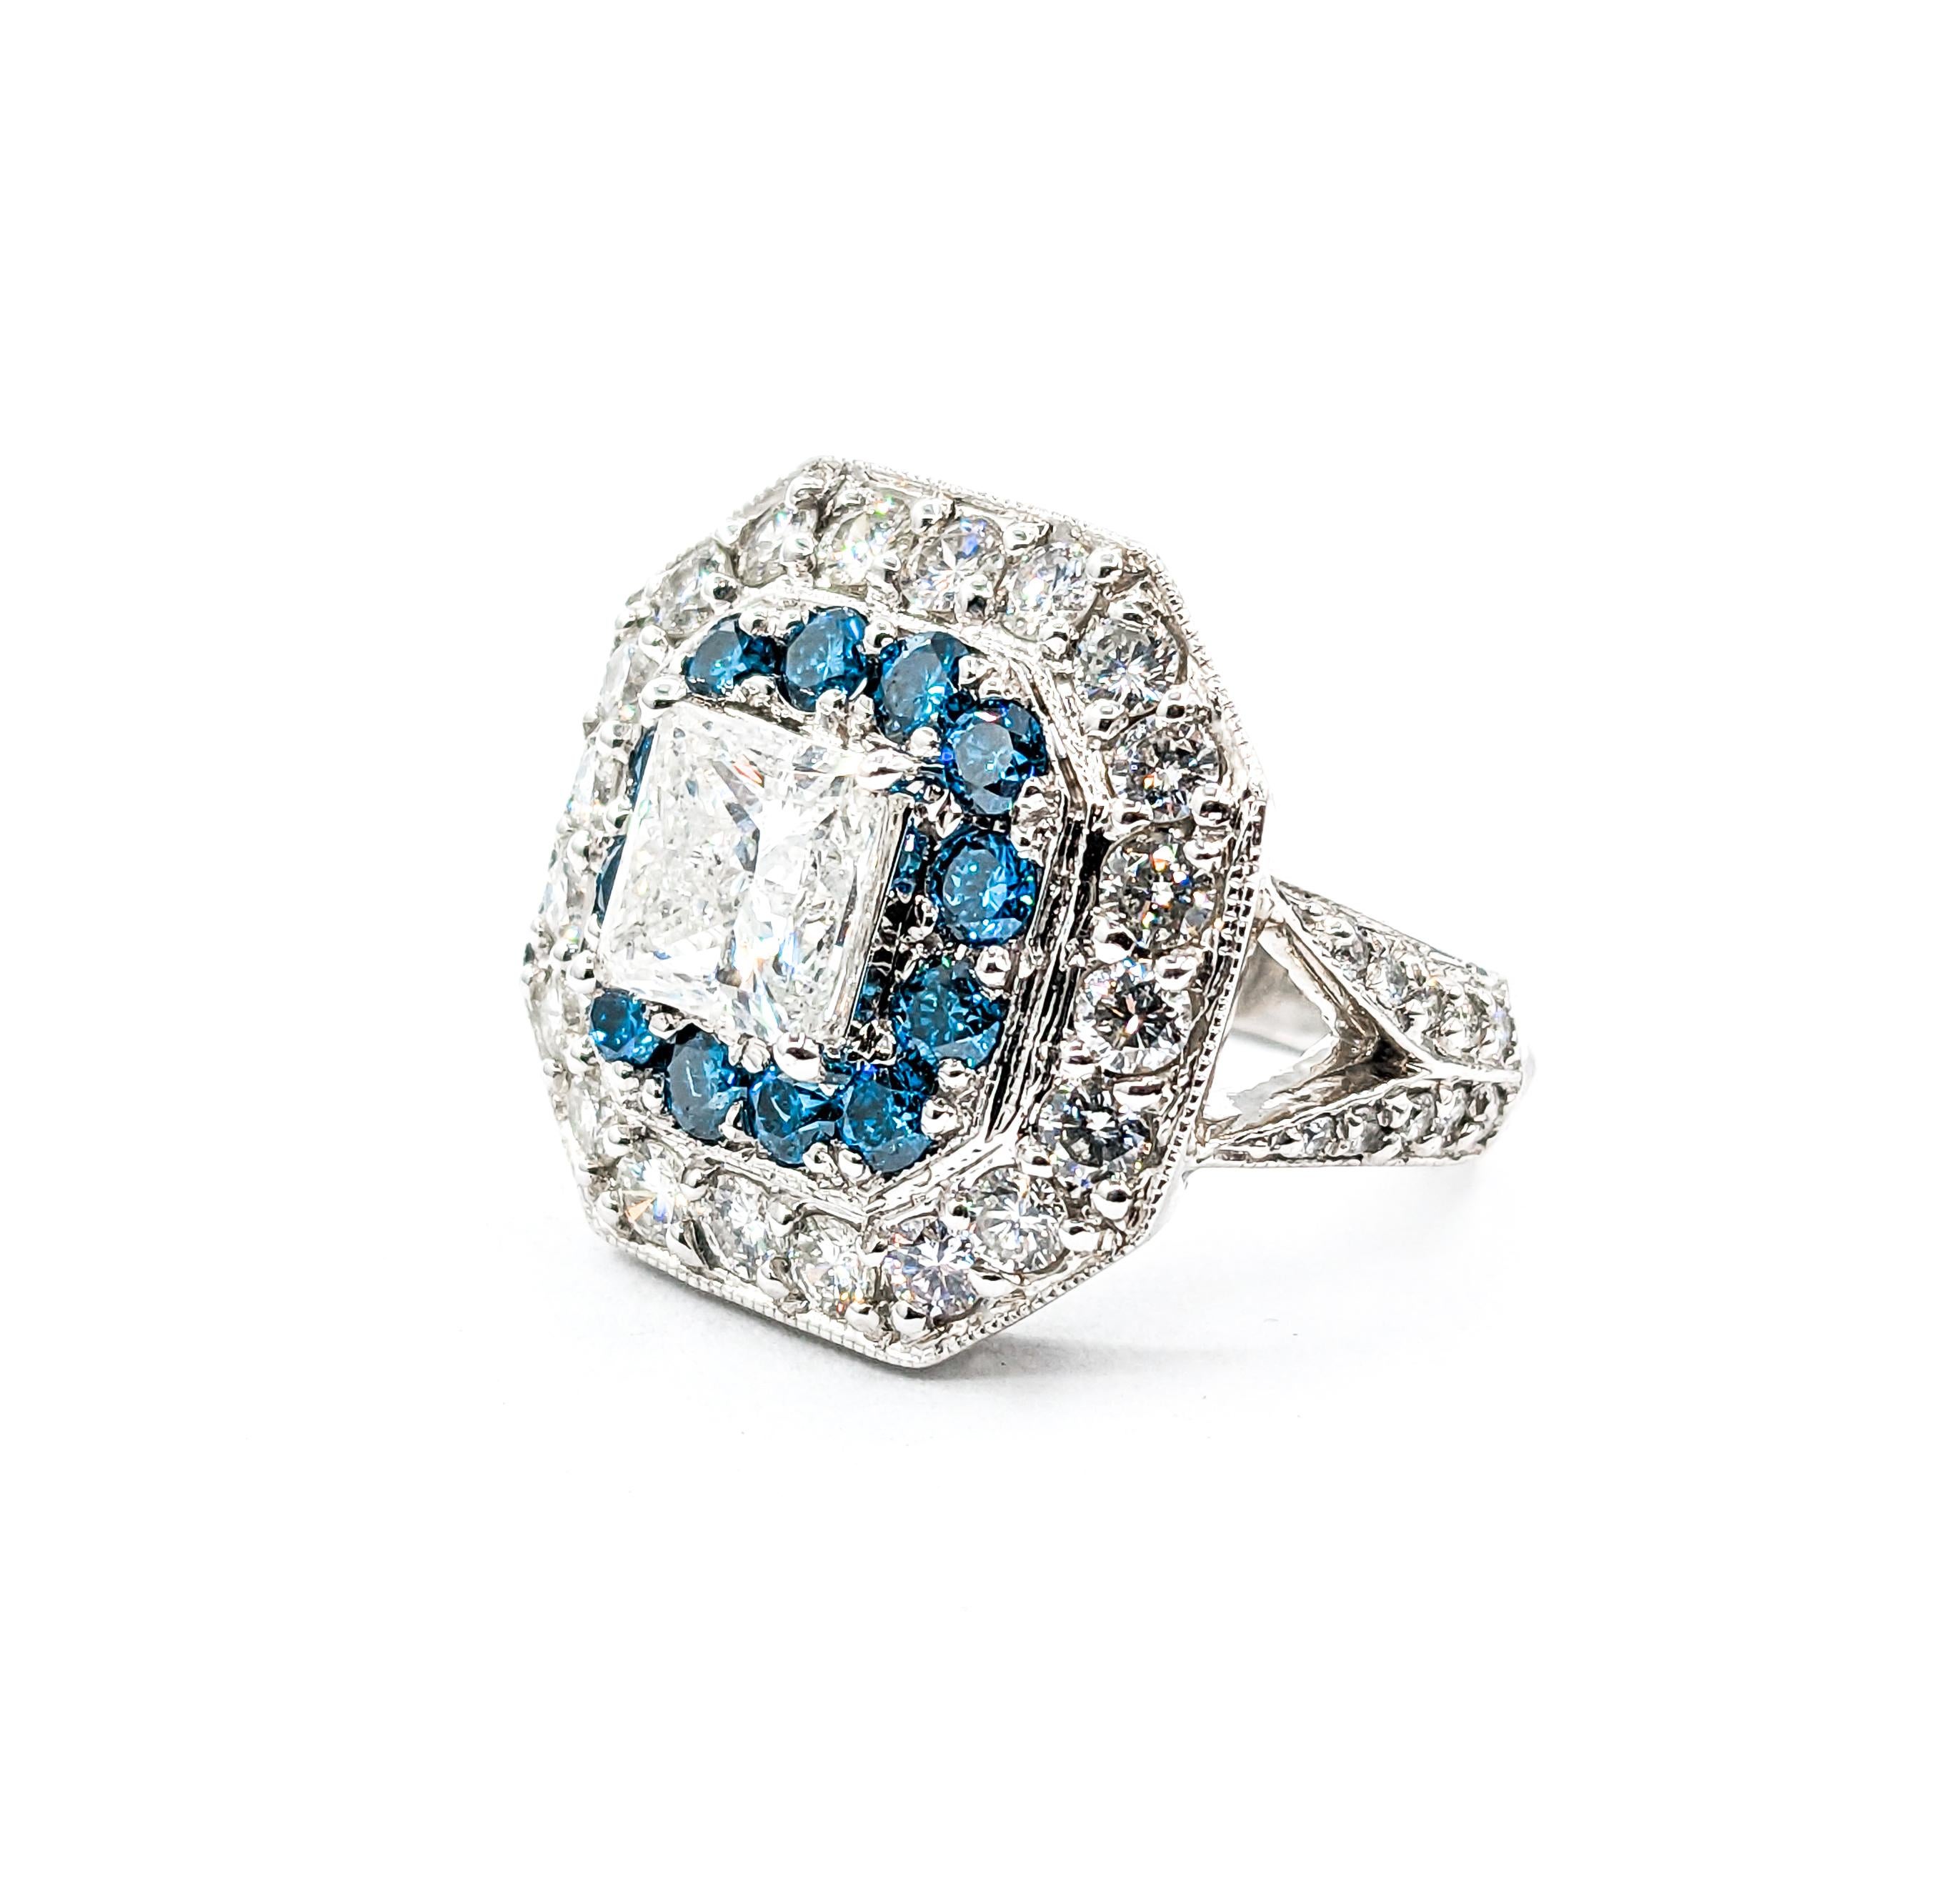 Superb White and Blue Diamond Statement Ring For Sale 5